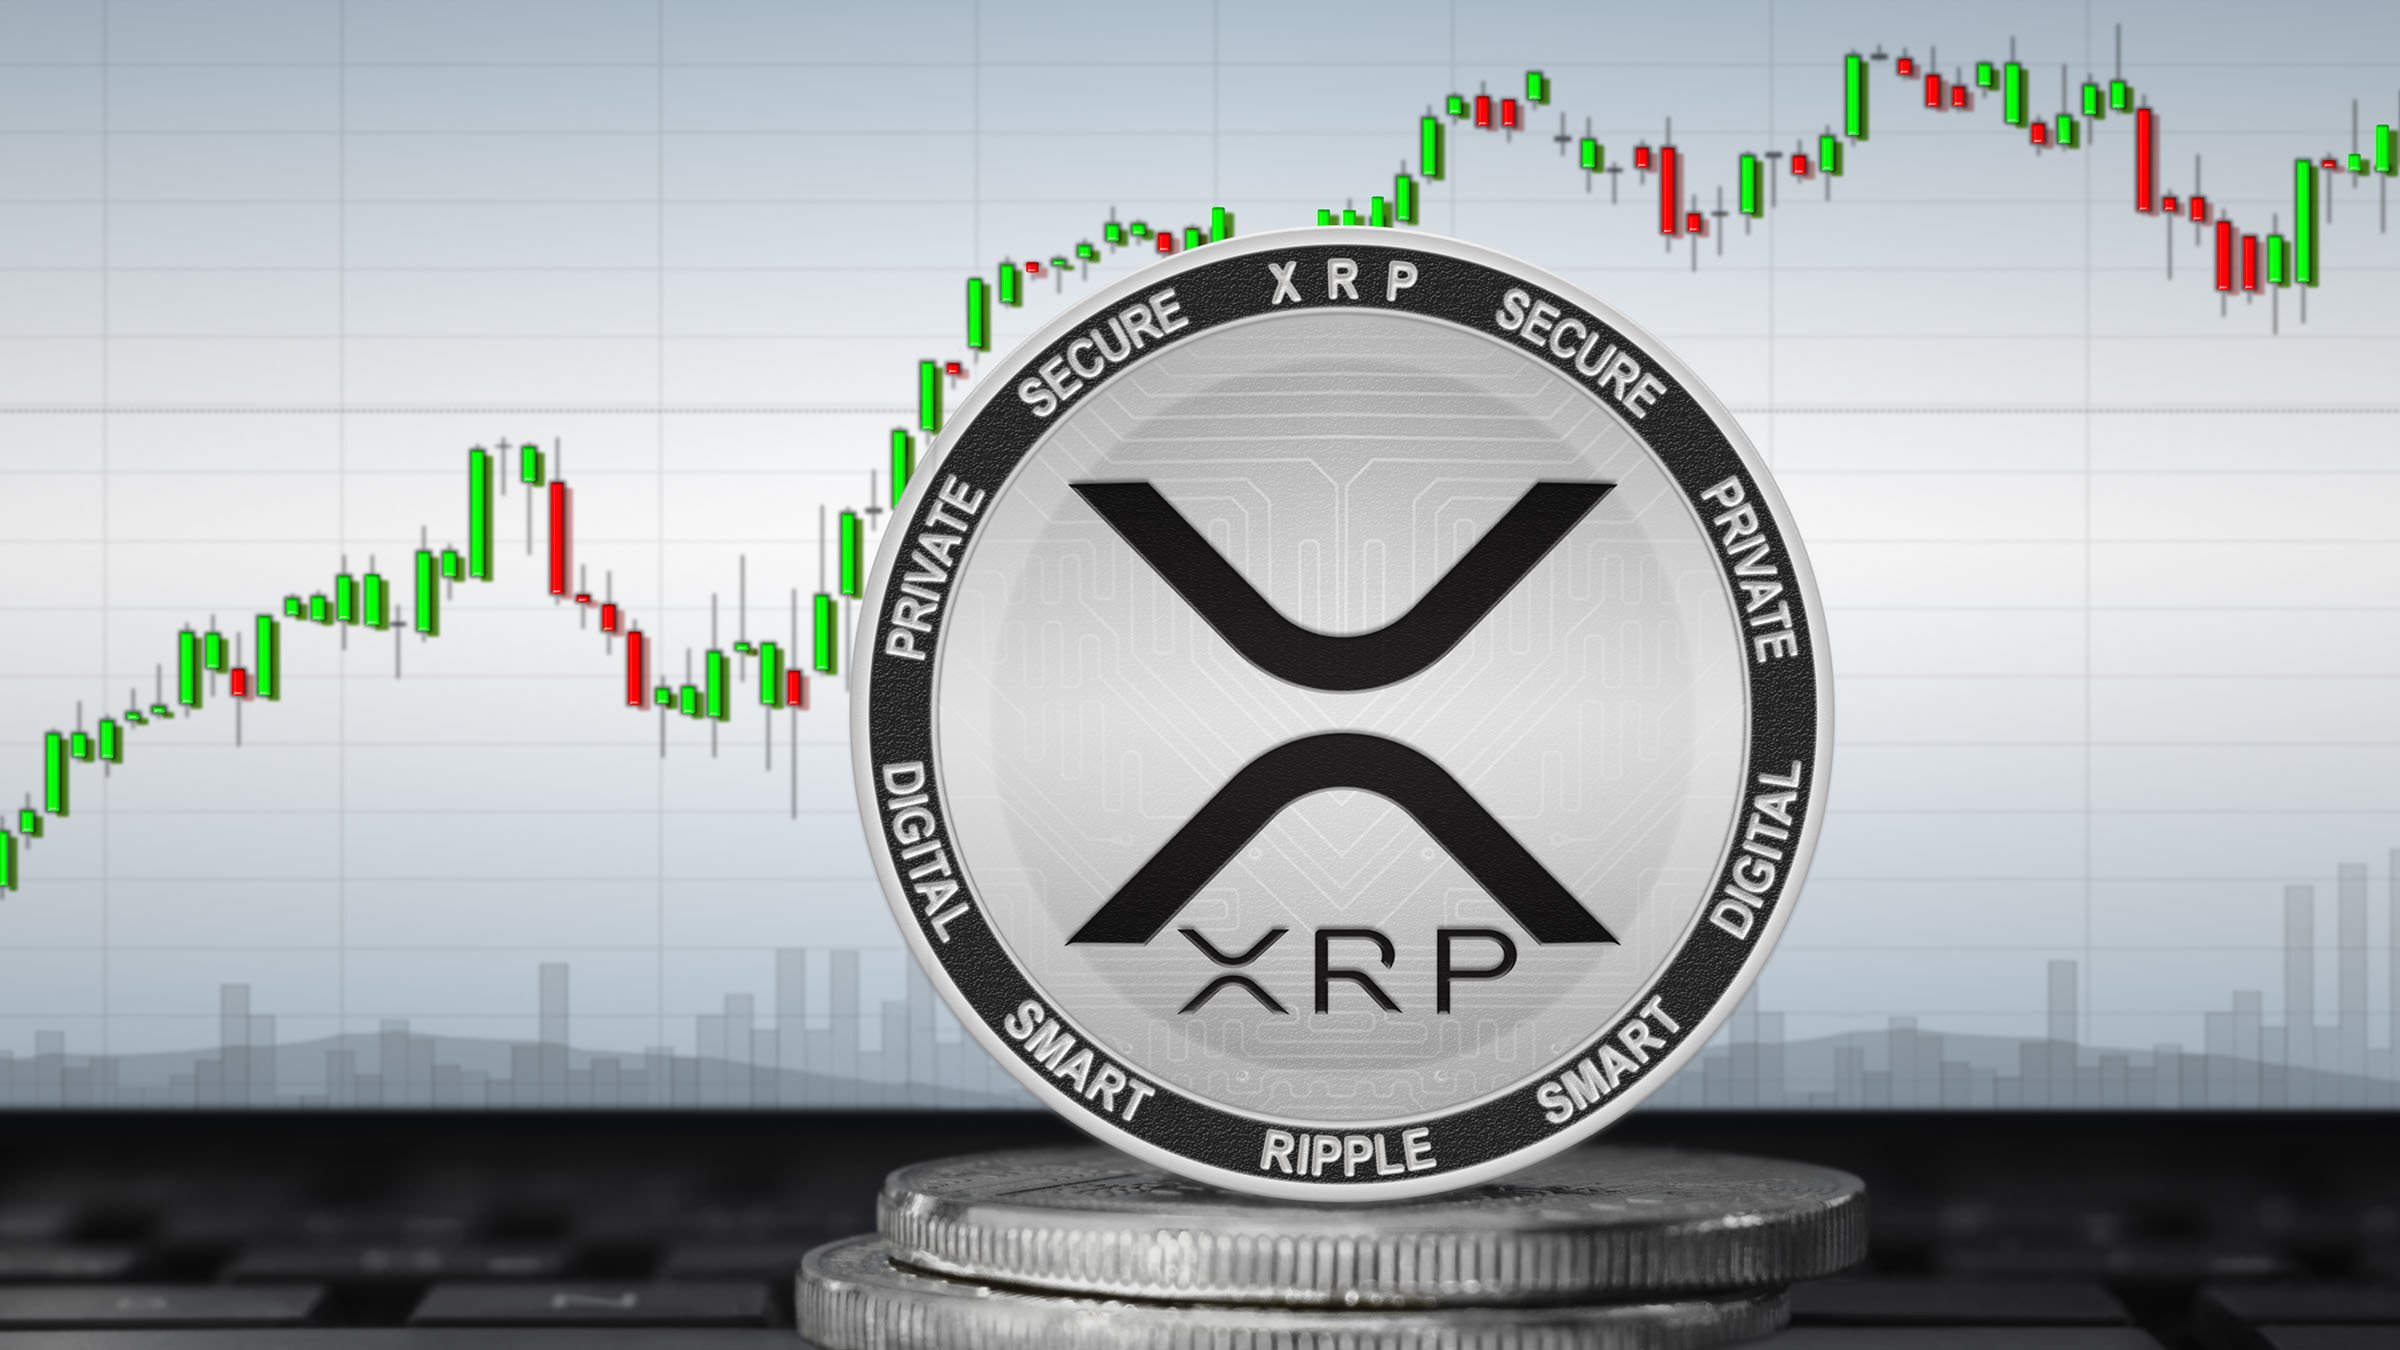 XRP Rallies 40% in a Week, Flips Solana's Trading Volume